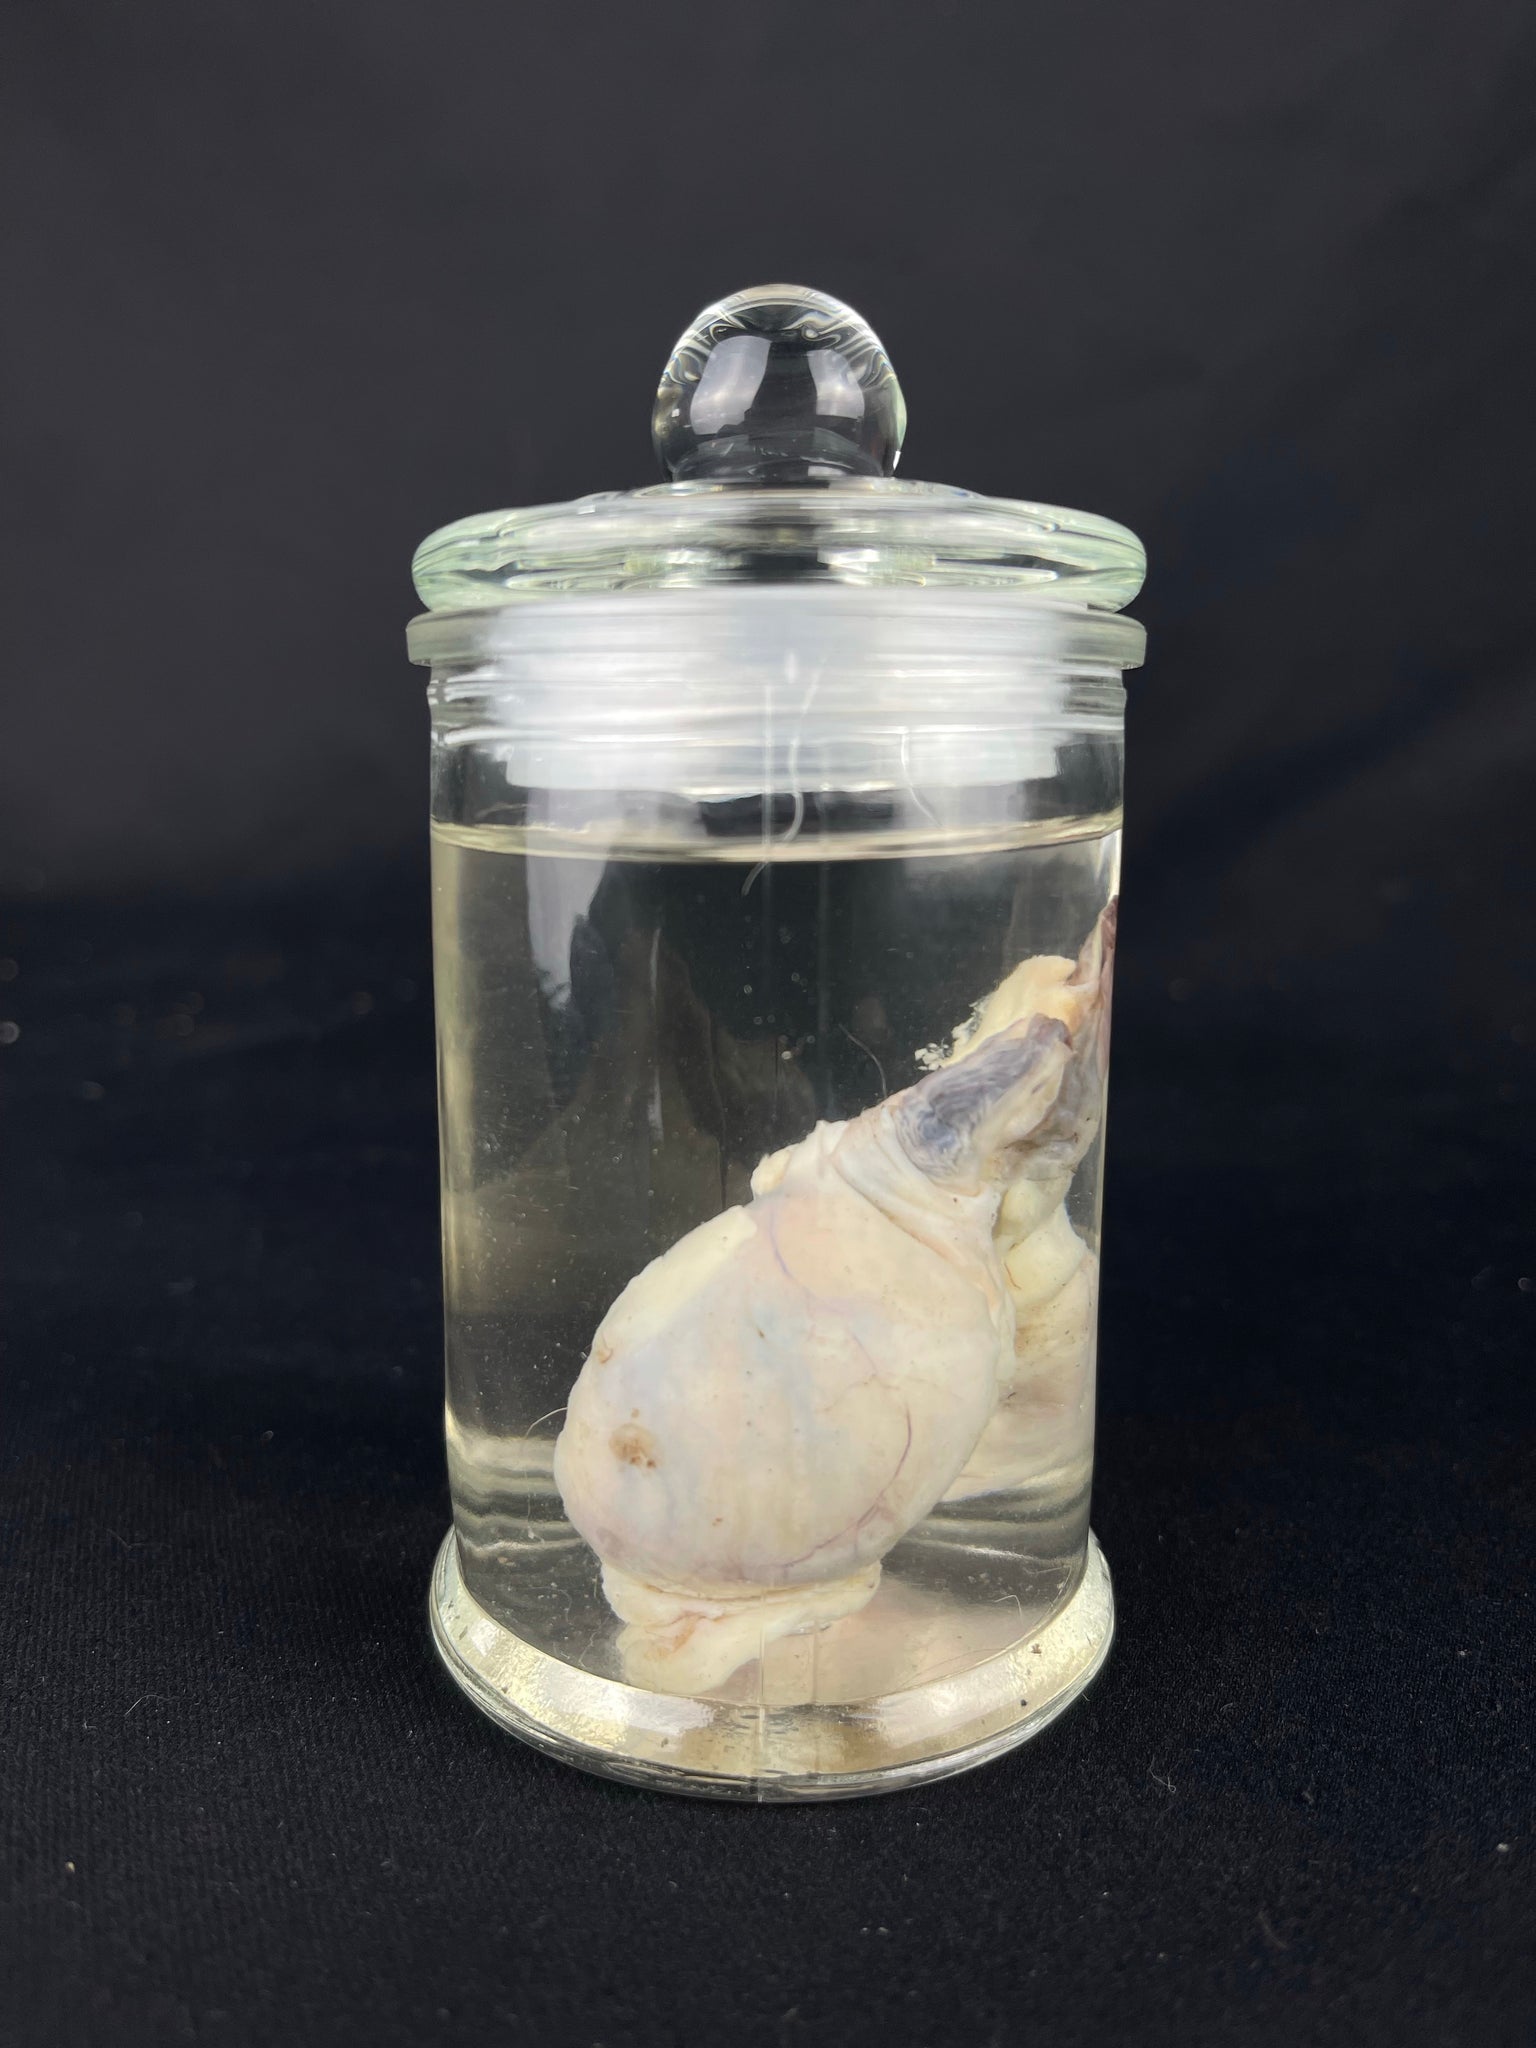 danielle speight recommends picture of testicles in a jar pic